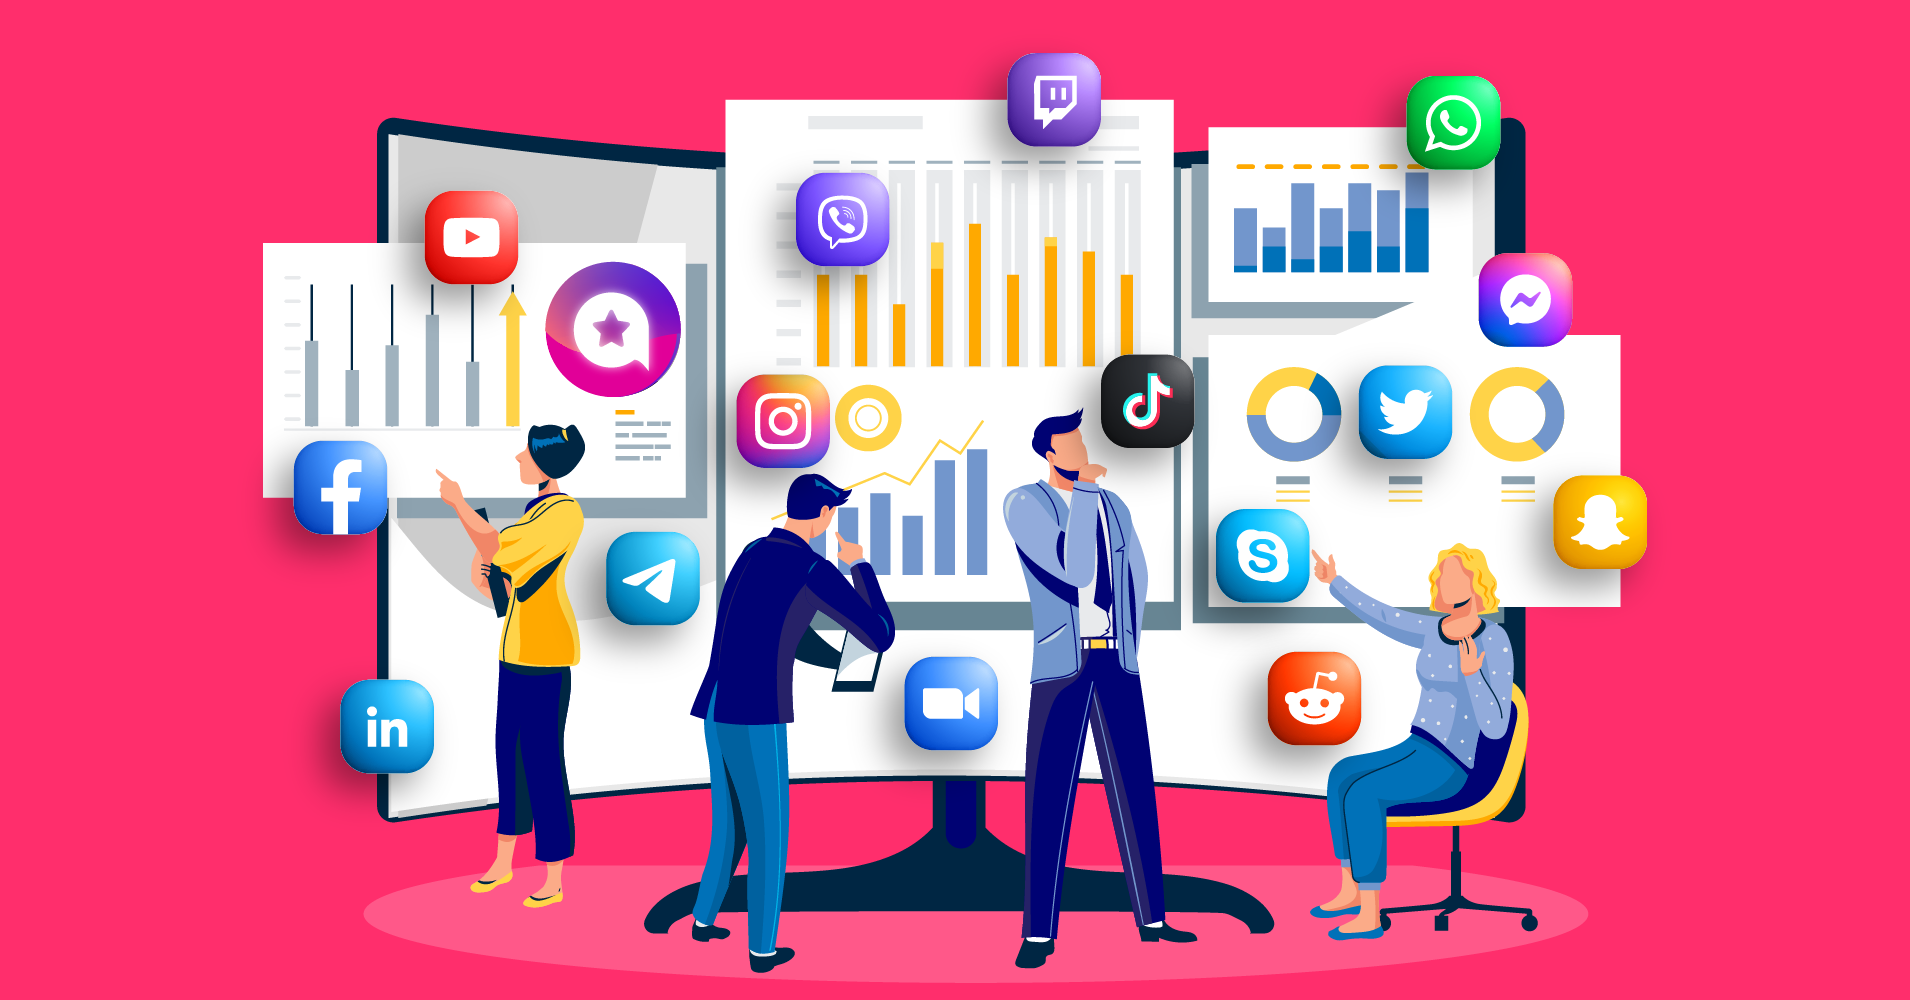 Professionals analyzing and interacting with various social media and digital platform icons, highlighting the importance of digital marketing and analytics.